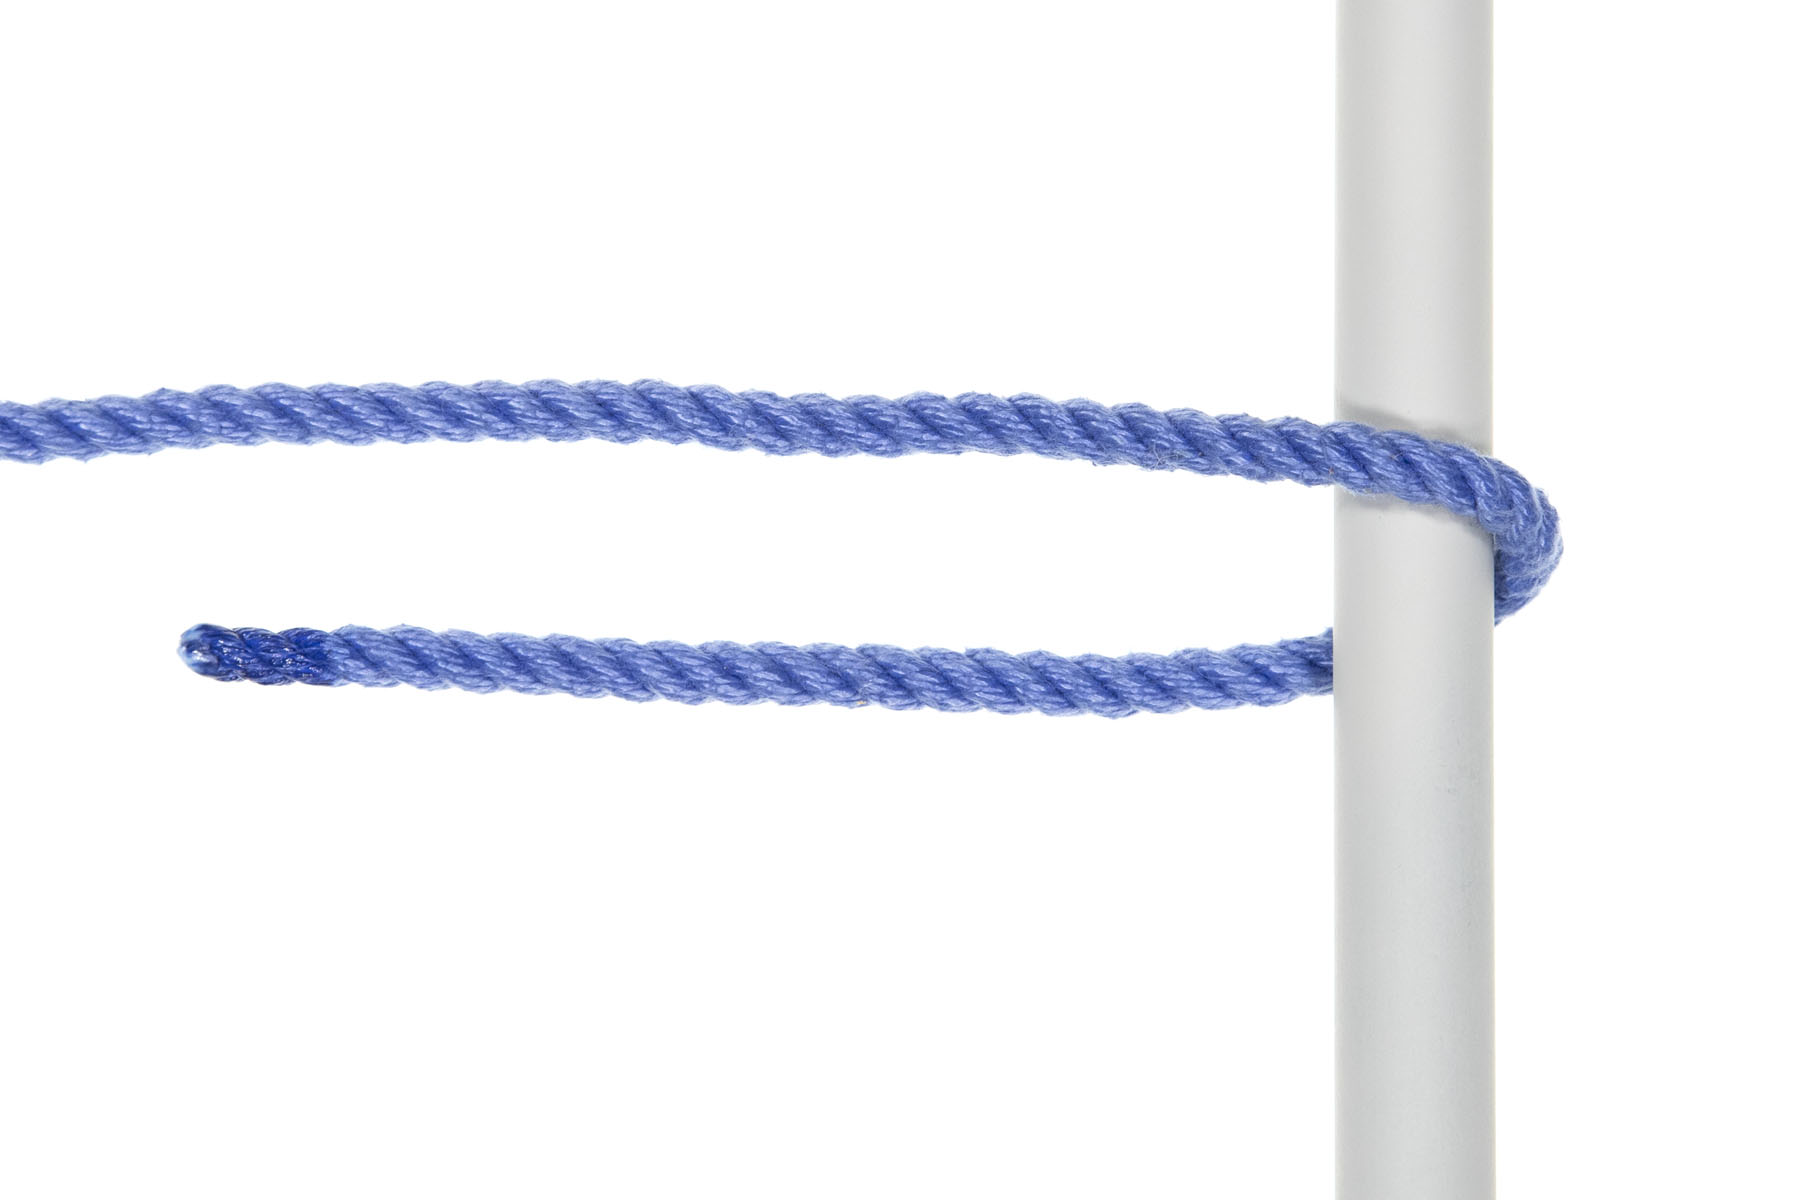 A one inch gray pole crosses the frame vertically. A blue rope enters from the left and doubles back around the pole, going over and then under it. Eight inches of the tail of the rope are pointed back toward the left, just under the standing part.